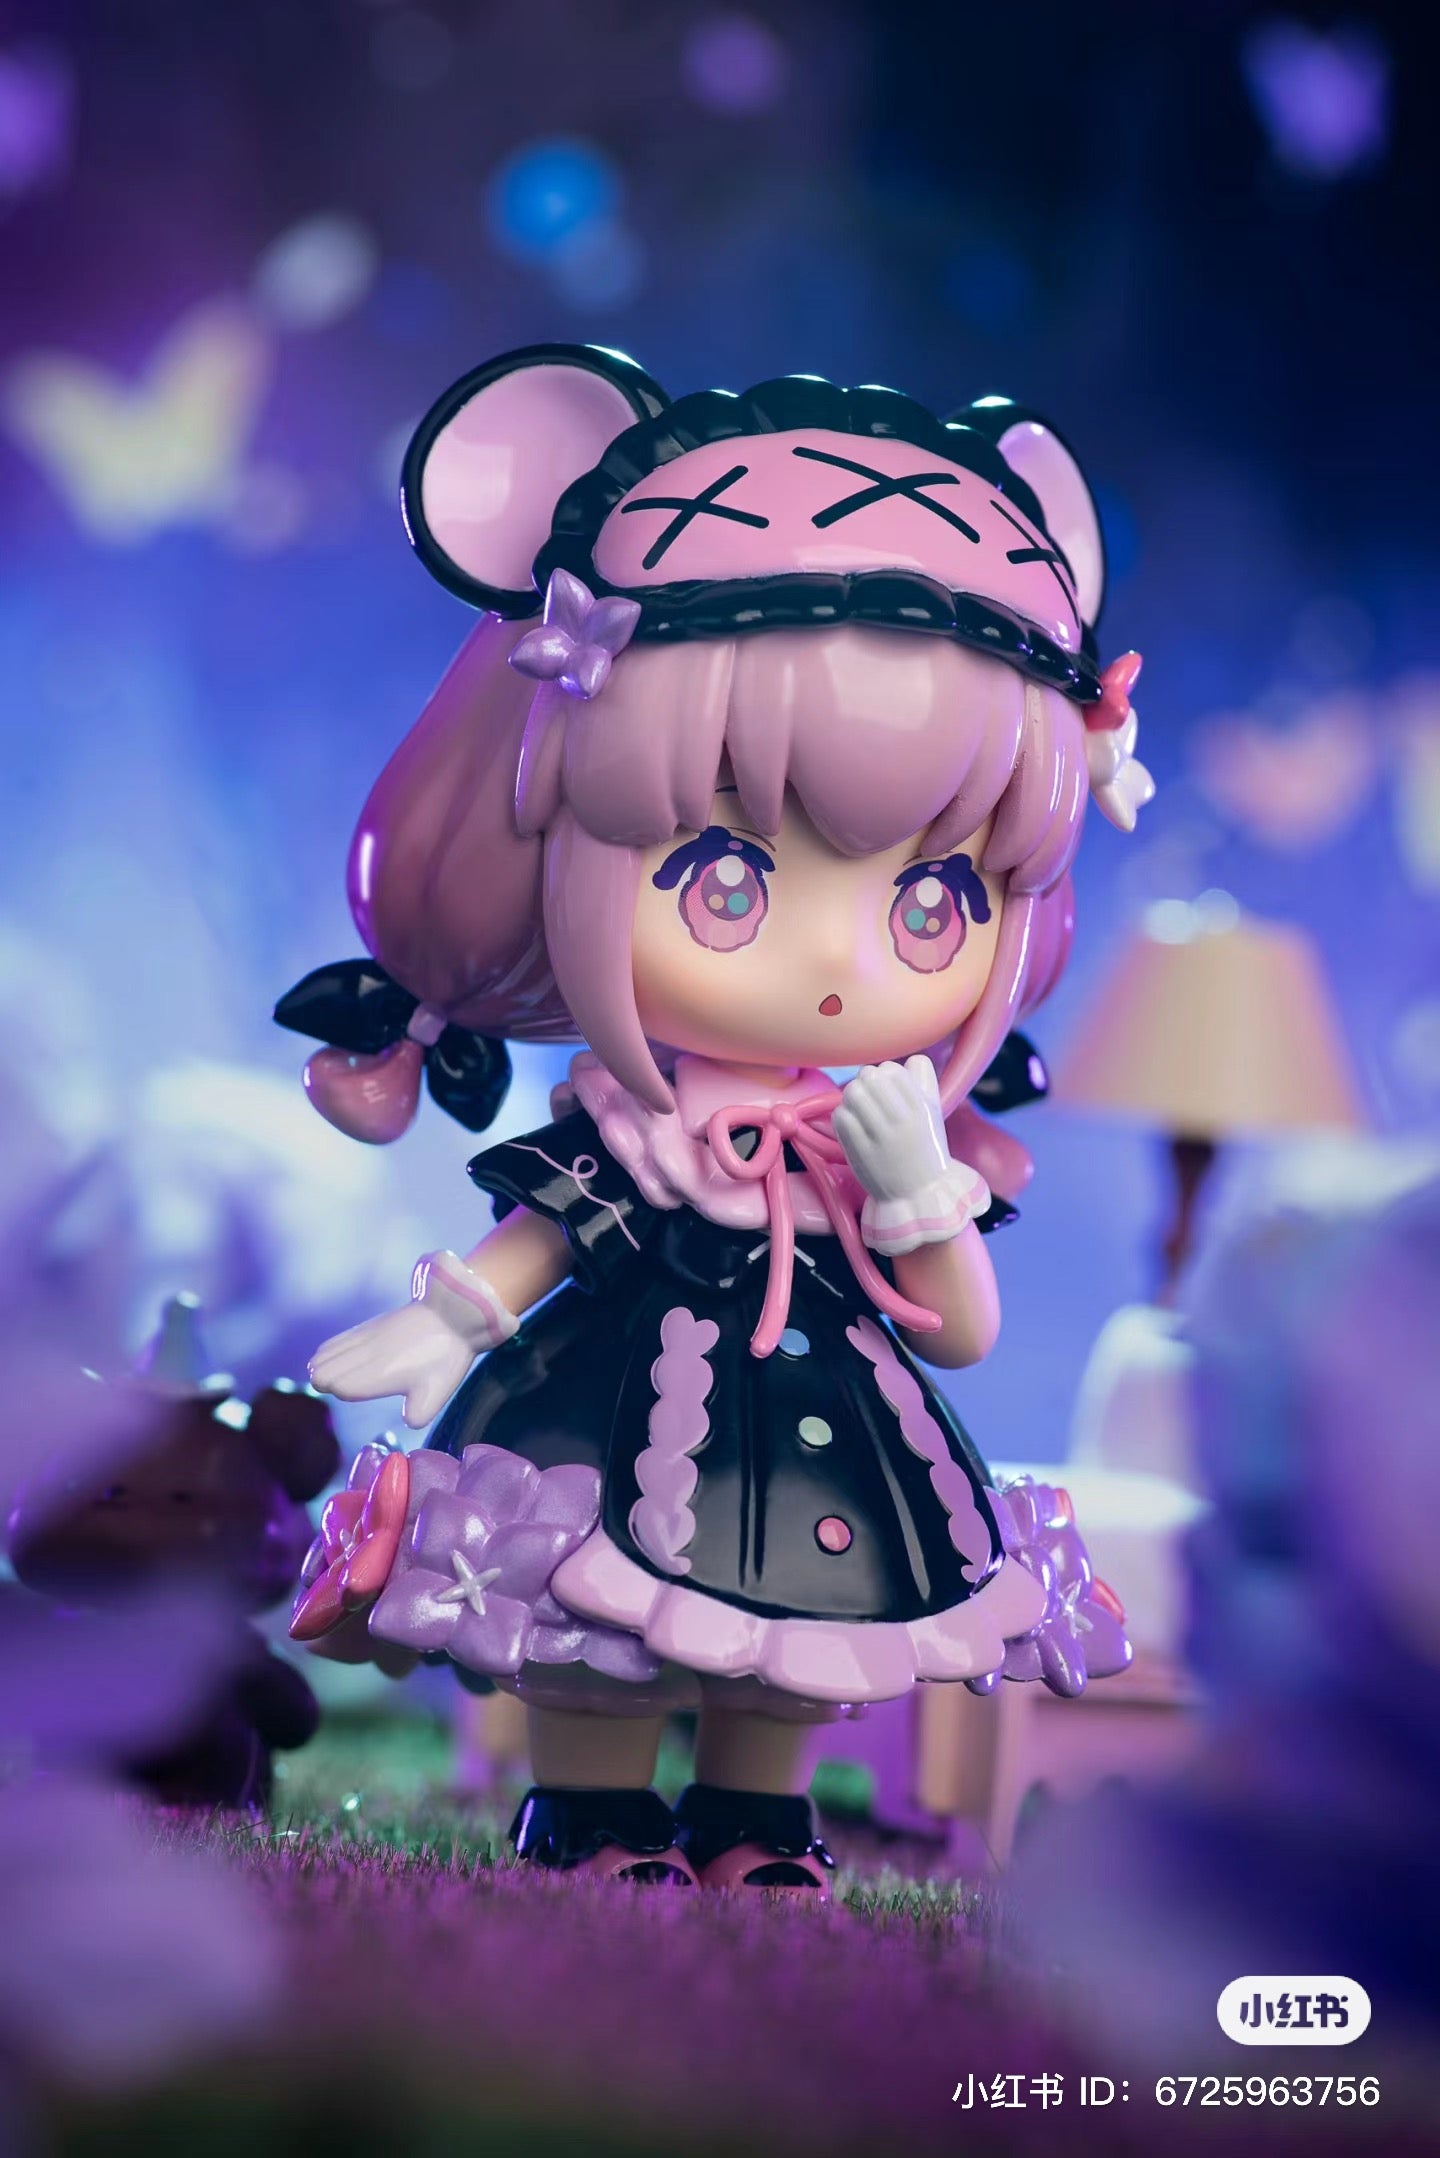 Toy figurine of a girl from NINIZEE The Secret Realm of Flowers Blind Box Series.